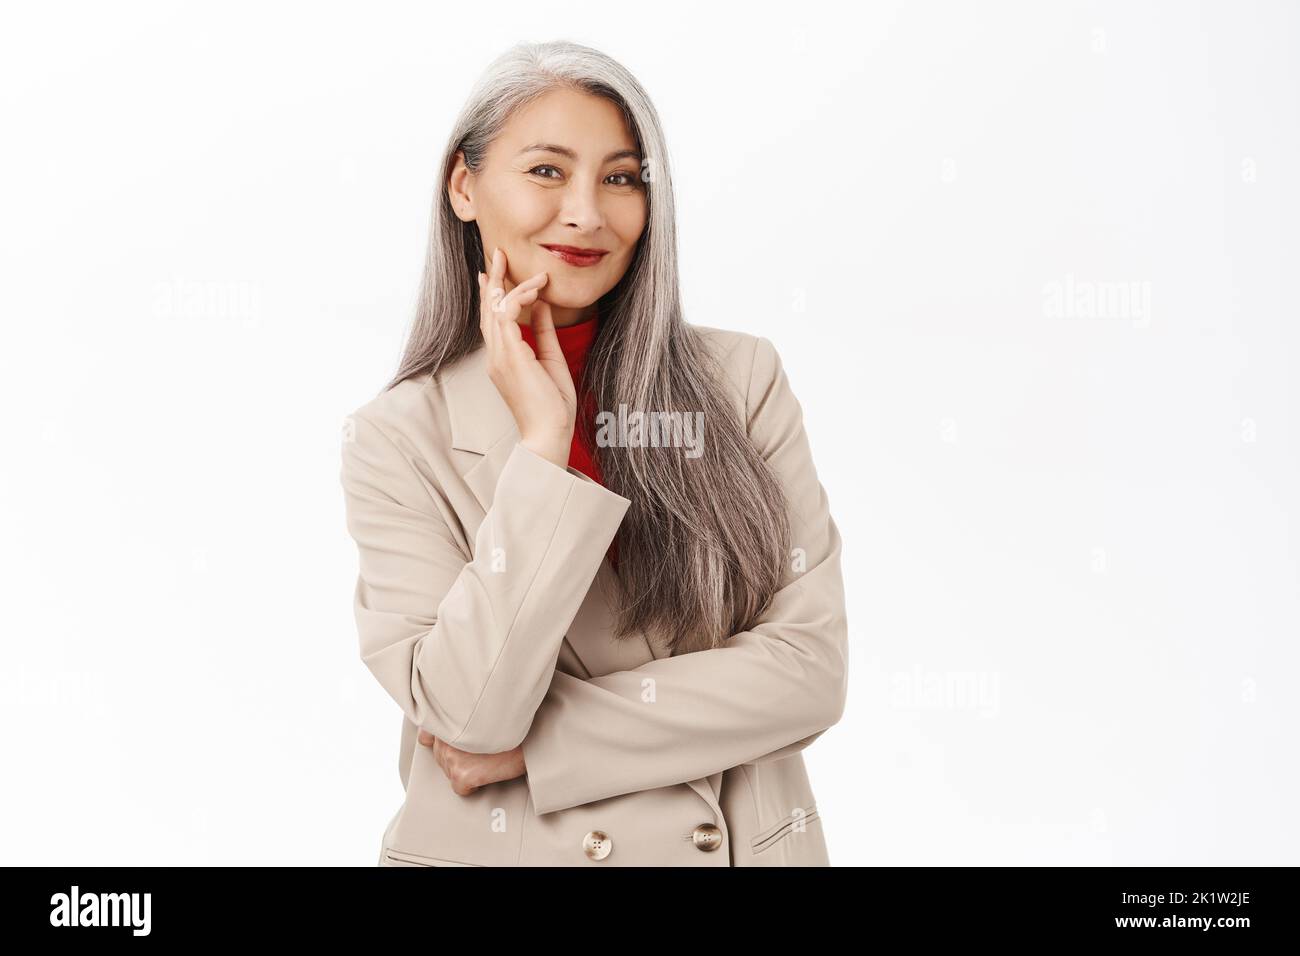 Portrait of beautiful asian female entrepreneur, businesswoman smiling, looking happy and confident, wearing stylish suit, standing over white backgro Stock Photo